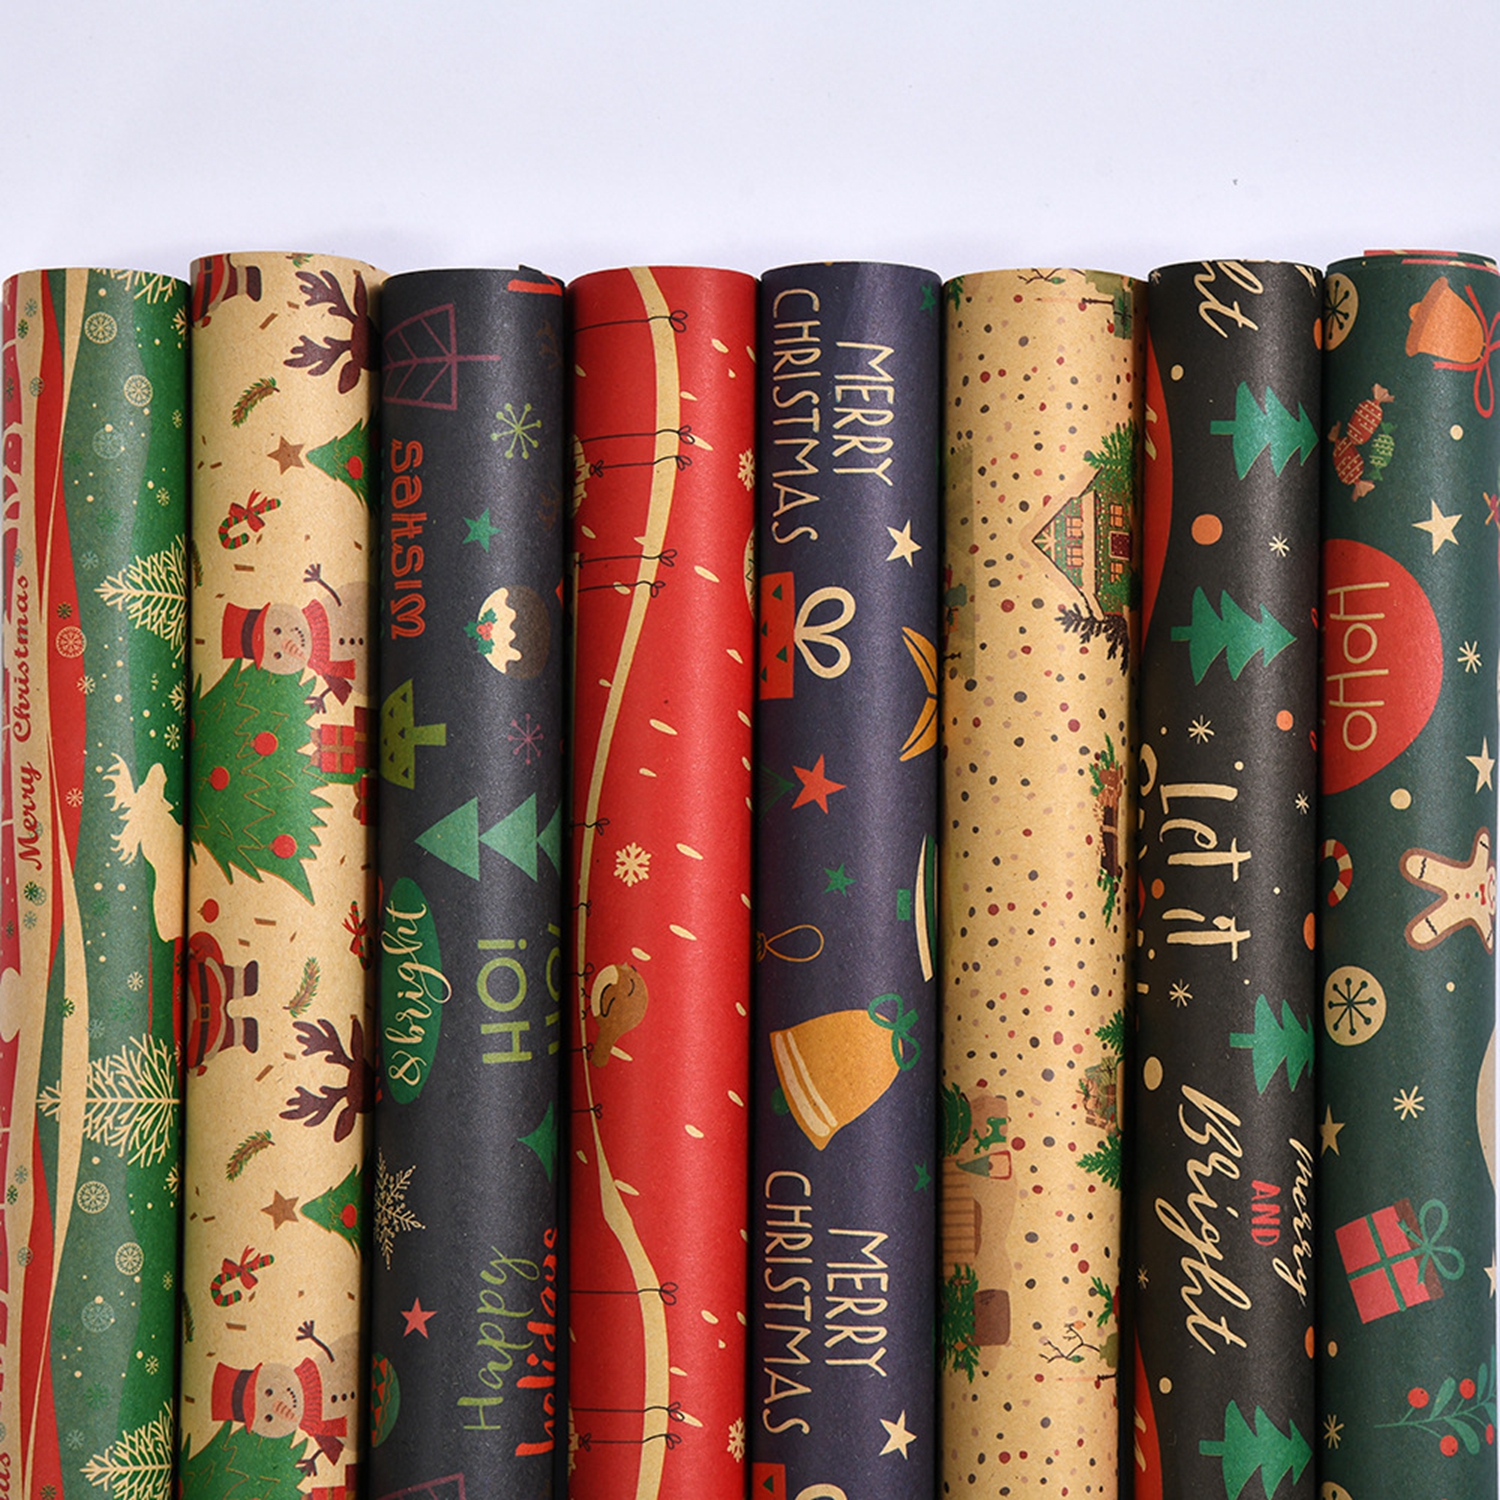 FAHXNVB Christmas Wrapping Paper Brown Kraft Paper with Christmas Elements Print Paper Christmas Gift Paper Gift Paper Vintage Floral Paper Kraft Paper